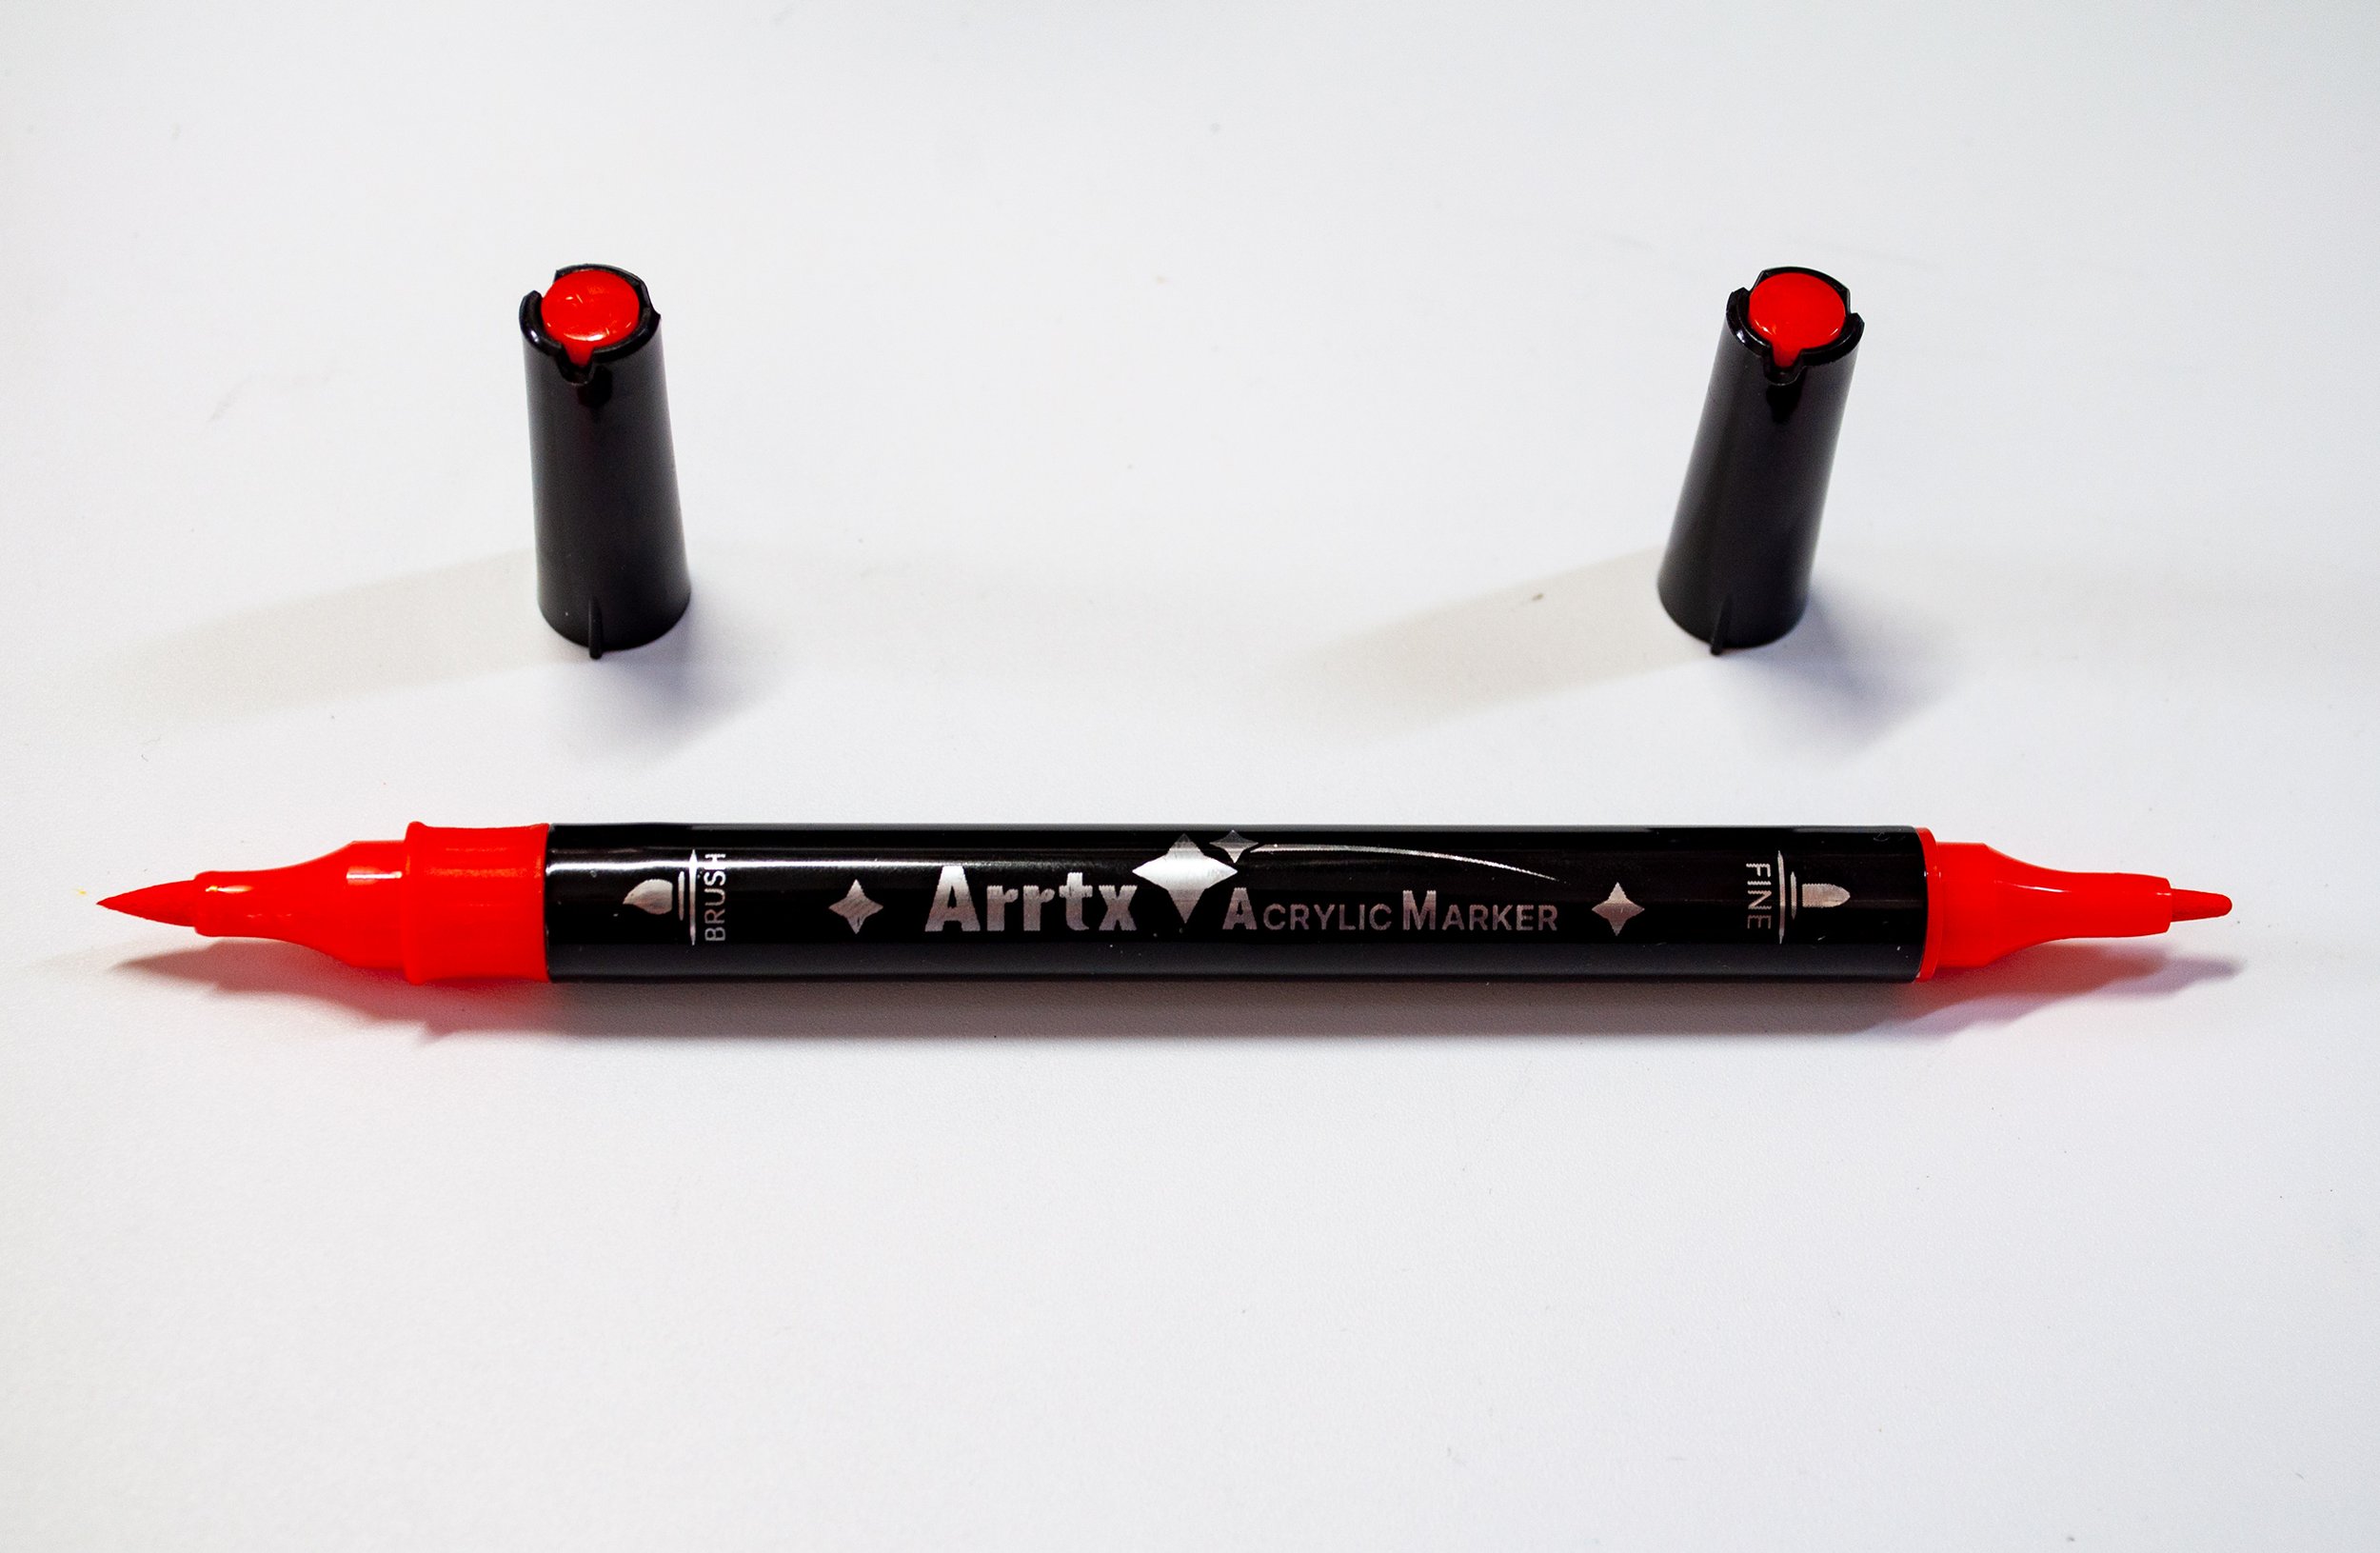 Arrtx acrylic markers : r/drawing